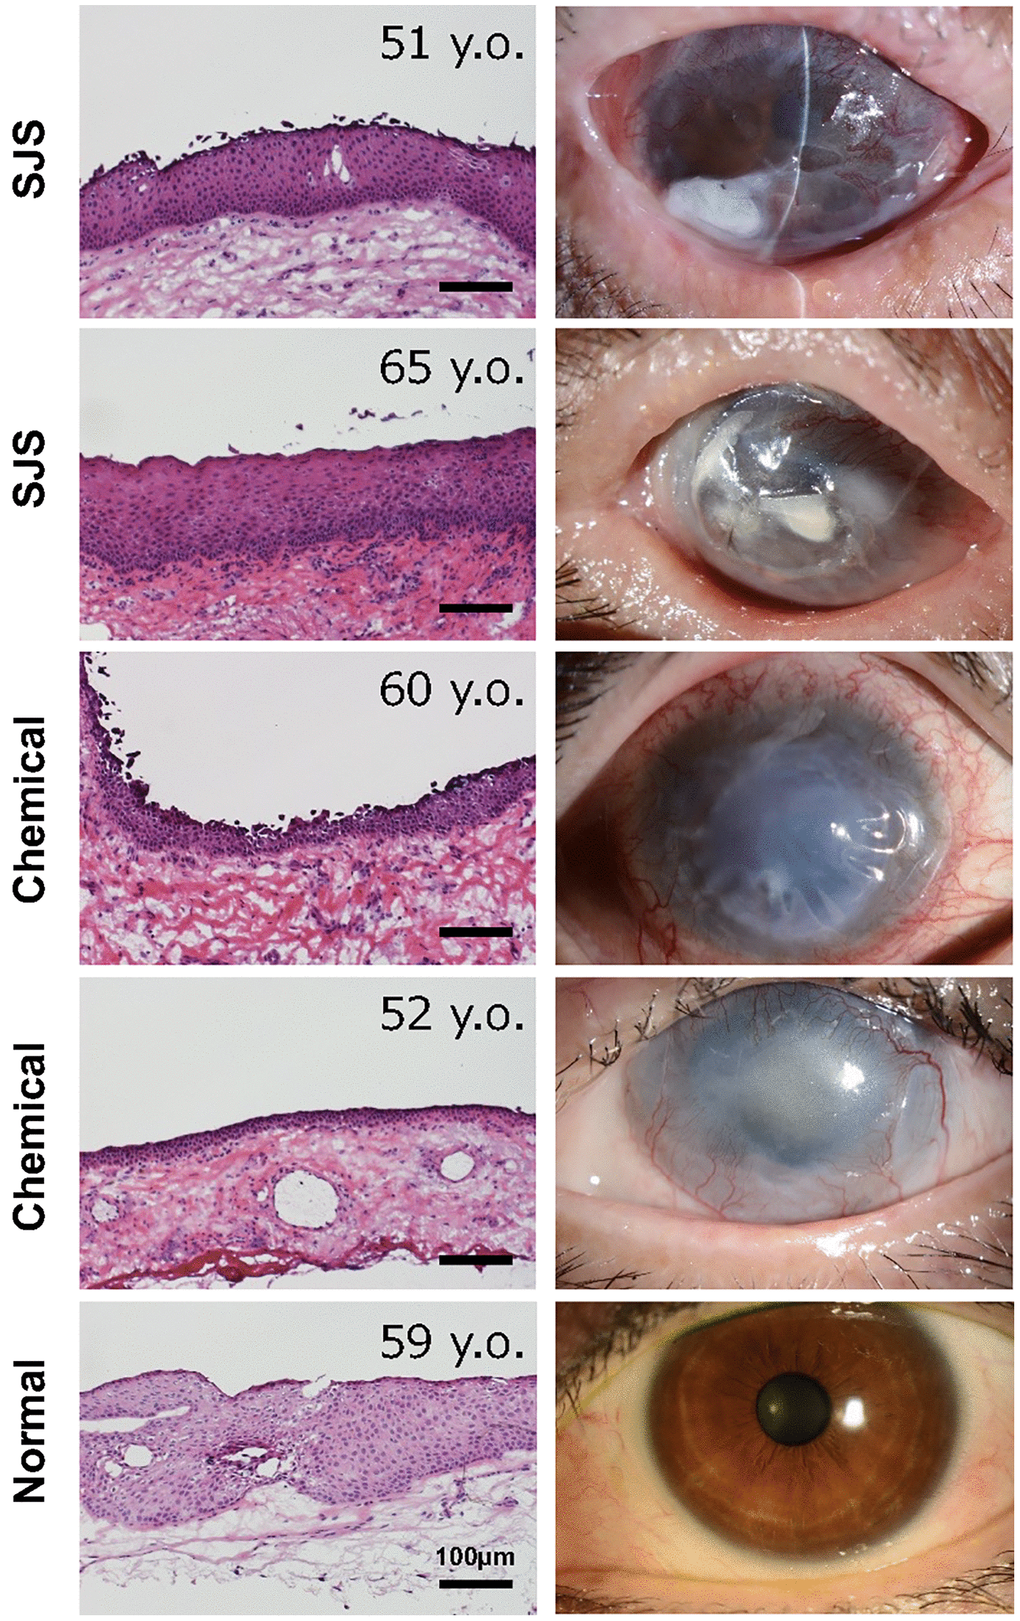 Histology of conjunctival tissues from patients with limbal stem cell deficiency. Representative ocular images of two cases with Stevens-Johnson syndrome (SJS), two cases with chemical injury, and one healthy subject. The histological sections were stained with hematoxylin and eosin stain. Scale bars indicate 100 μm.